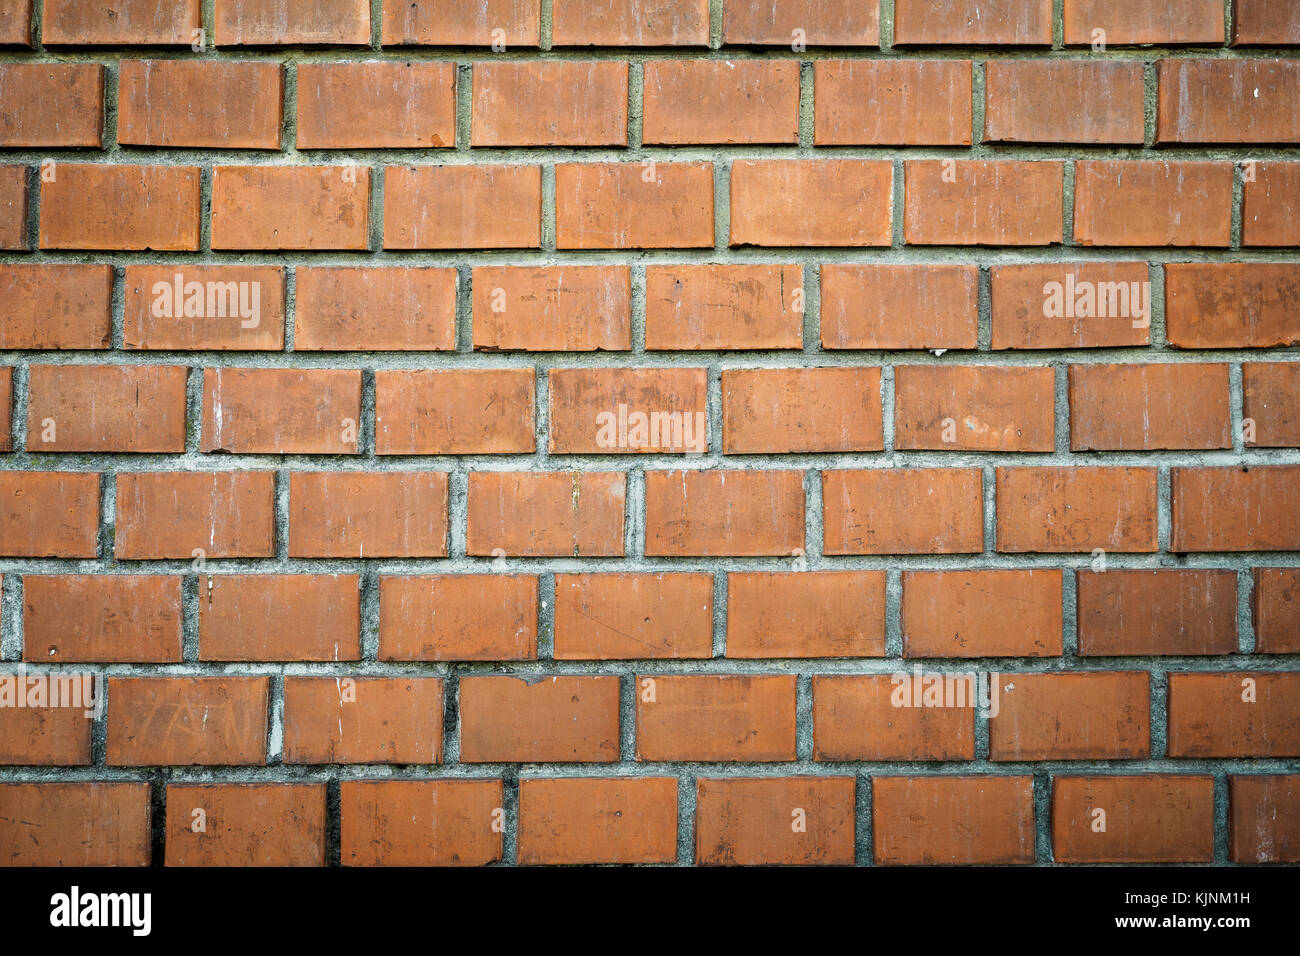 Red brick wall background. Landscape format. Stock Photo